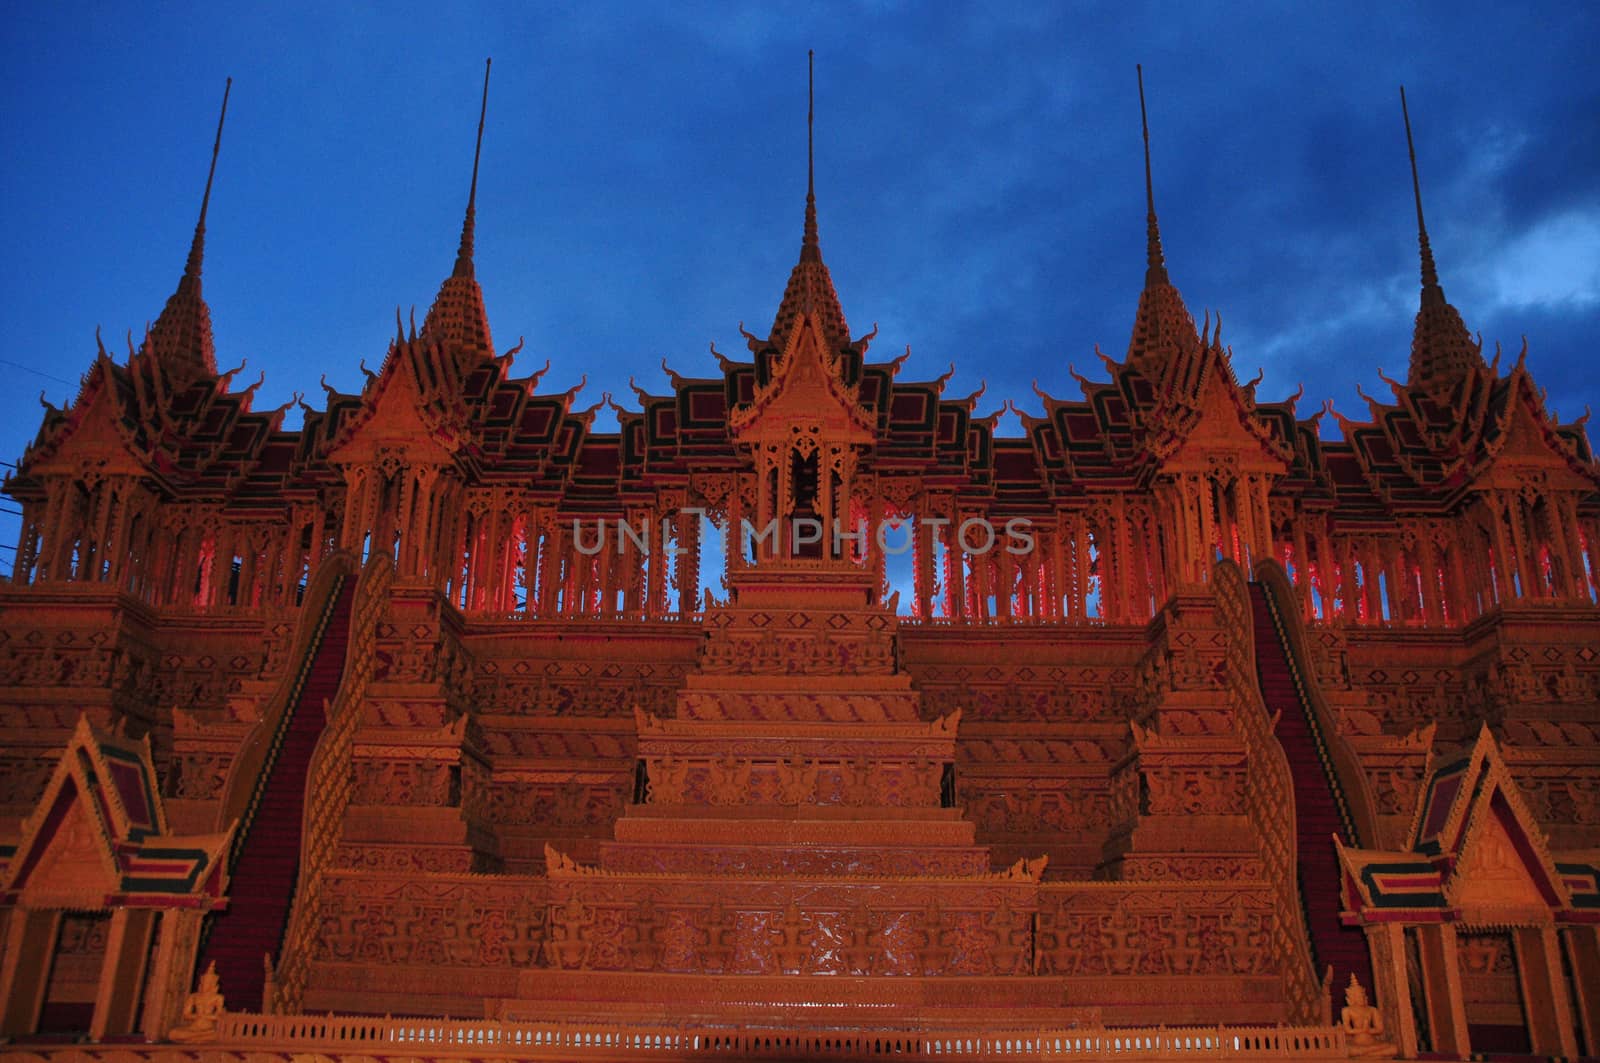 Sakon nakhon ,Thailand – October 23,2018 : Wax Castle Festival is held annually at the end of the Buddhist Lent. The event are objective to pay homage to Phra That Choeng Chum